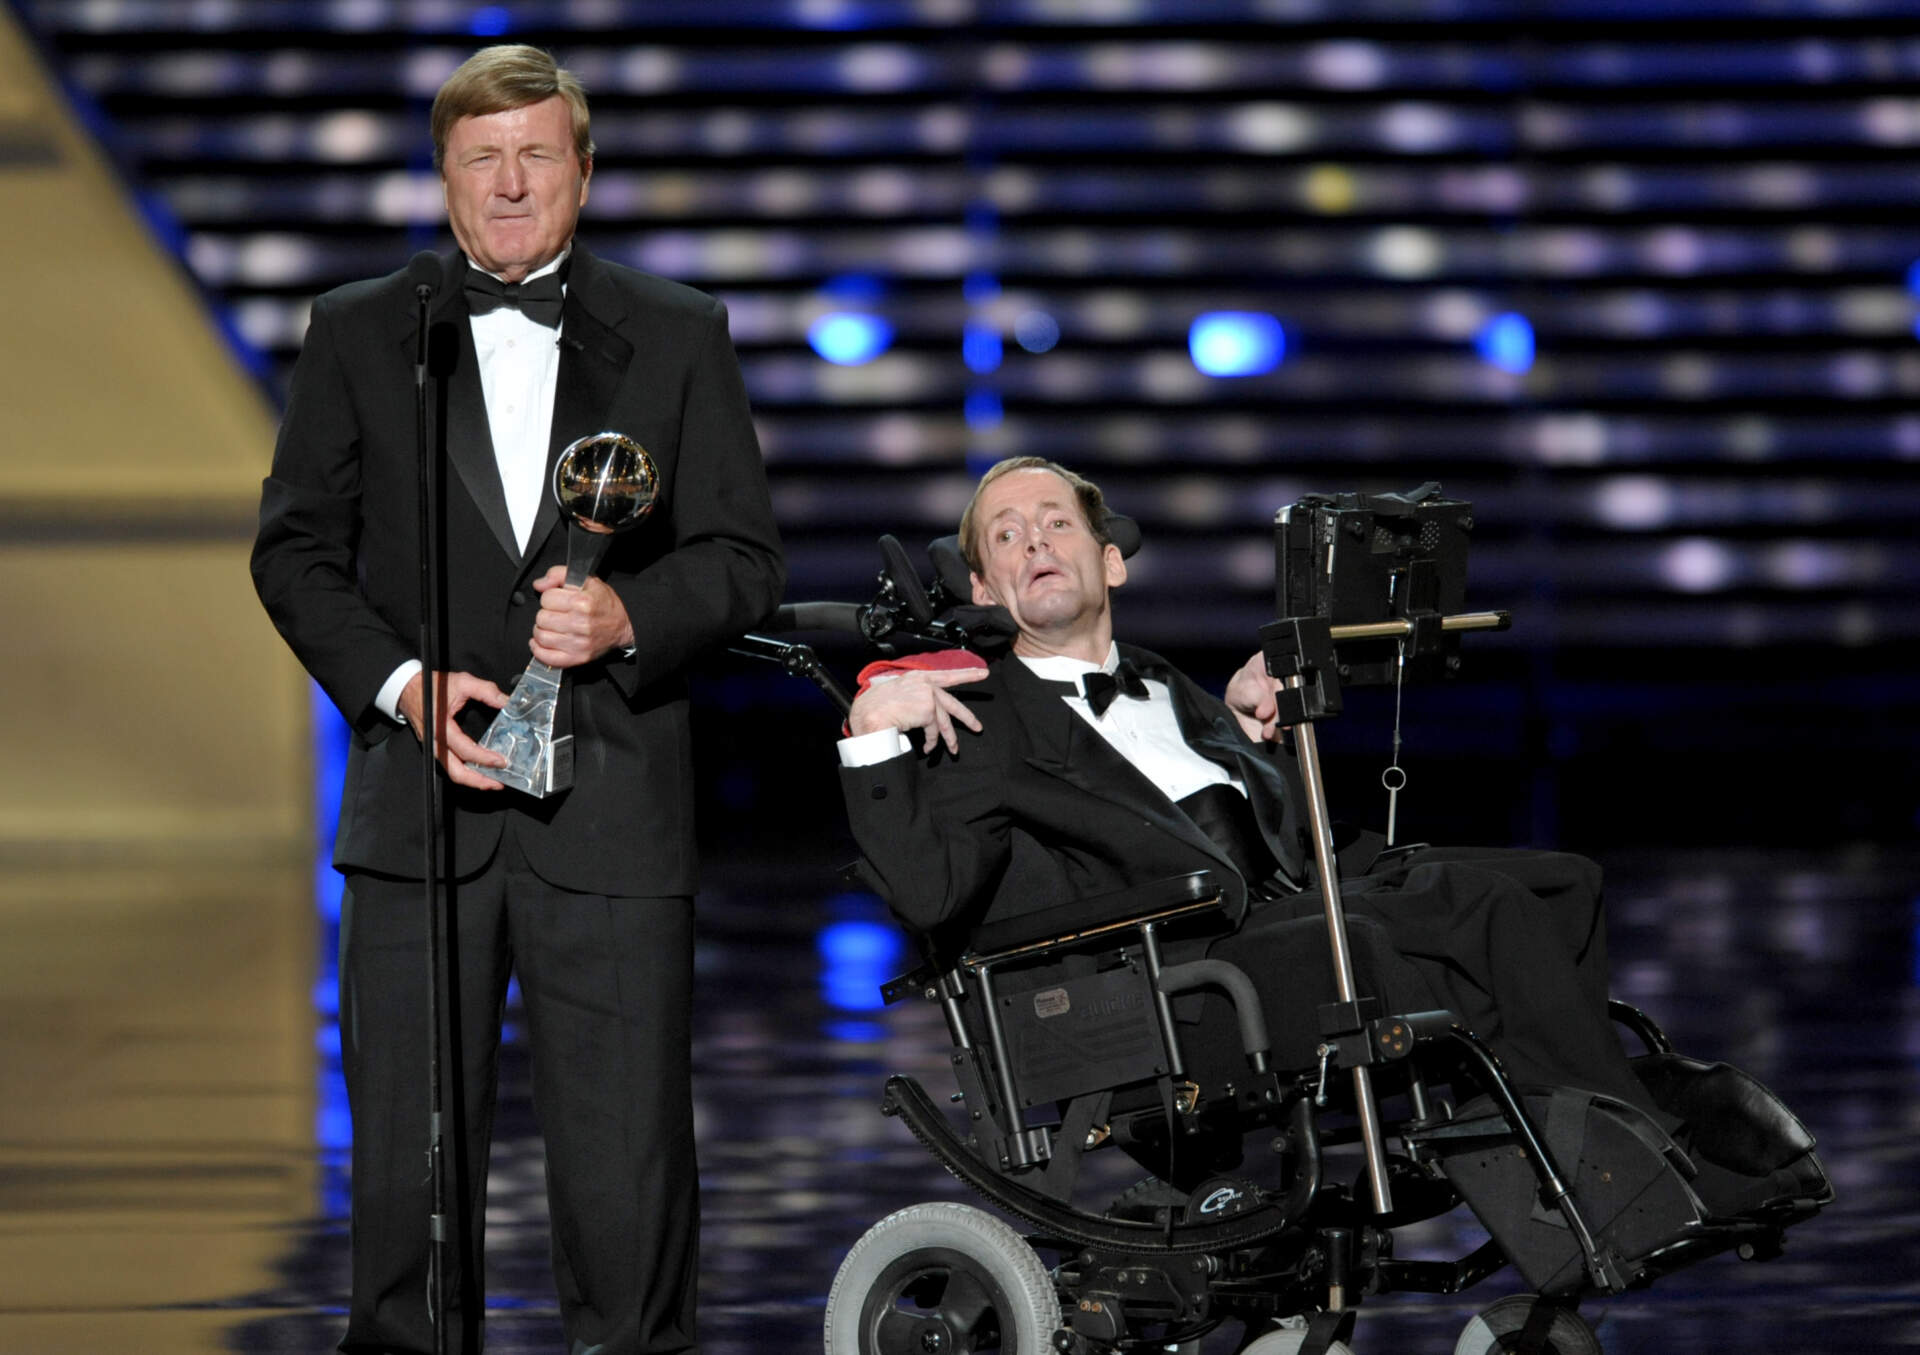 Dick Hoyt, left, and Rick Hoyt, accept the Jimmy V Perseverance Award at the ESPY Awards on Wednesday, July 17, 2013, at the Nokia Theater in Los Angeles. (John Shearer/Invision/AP)